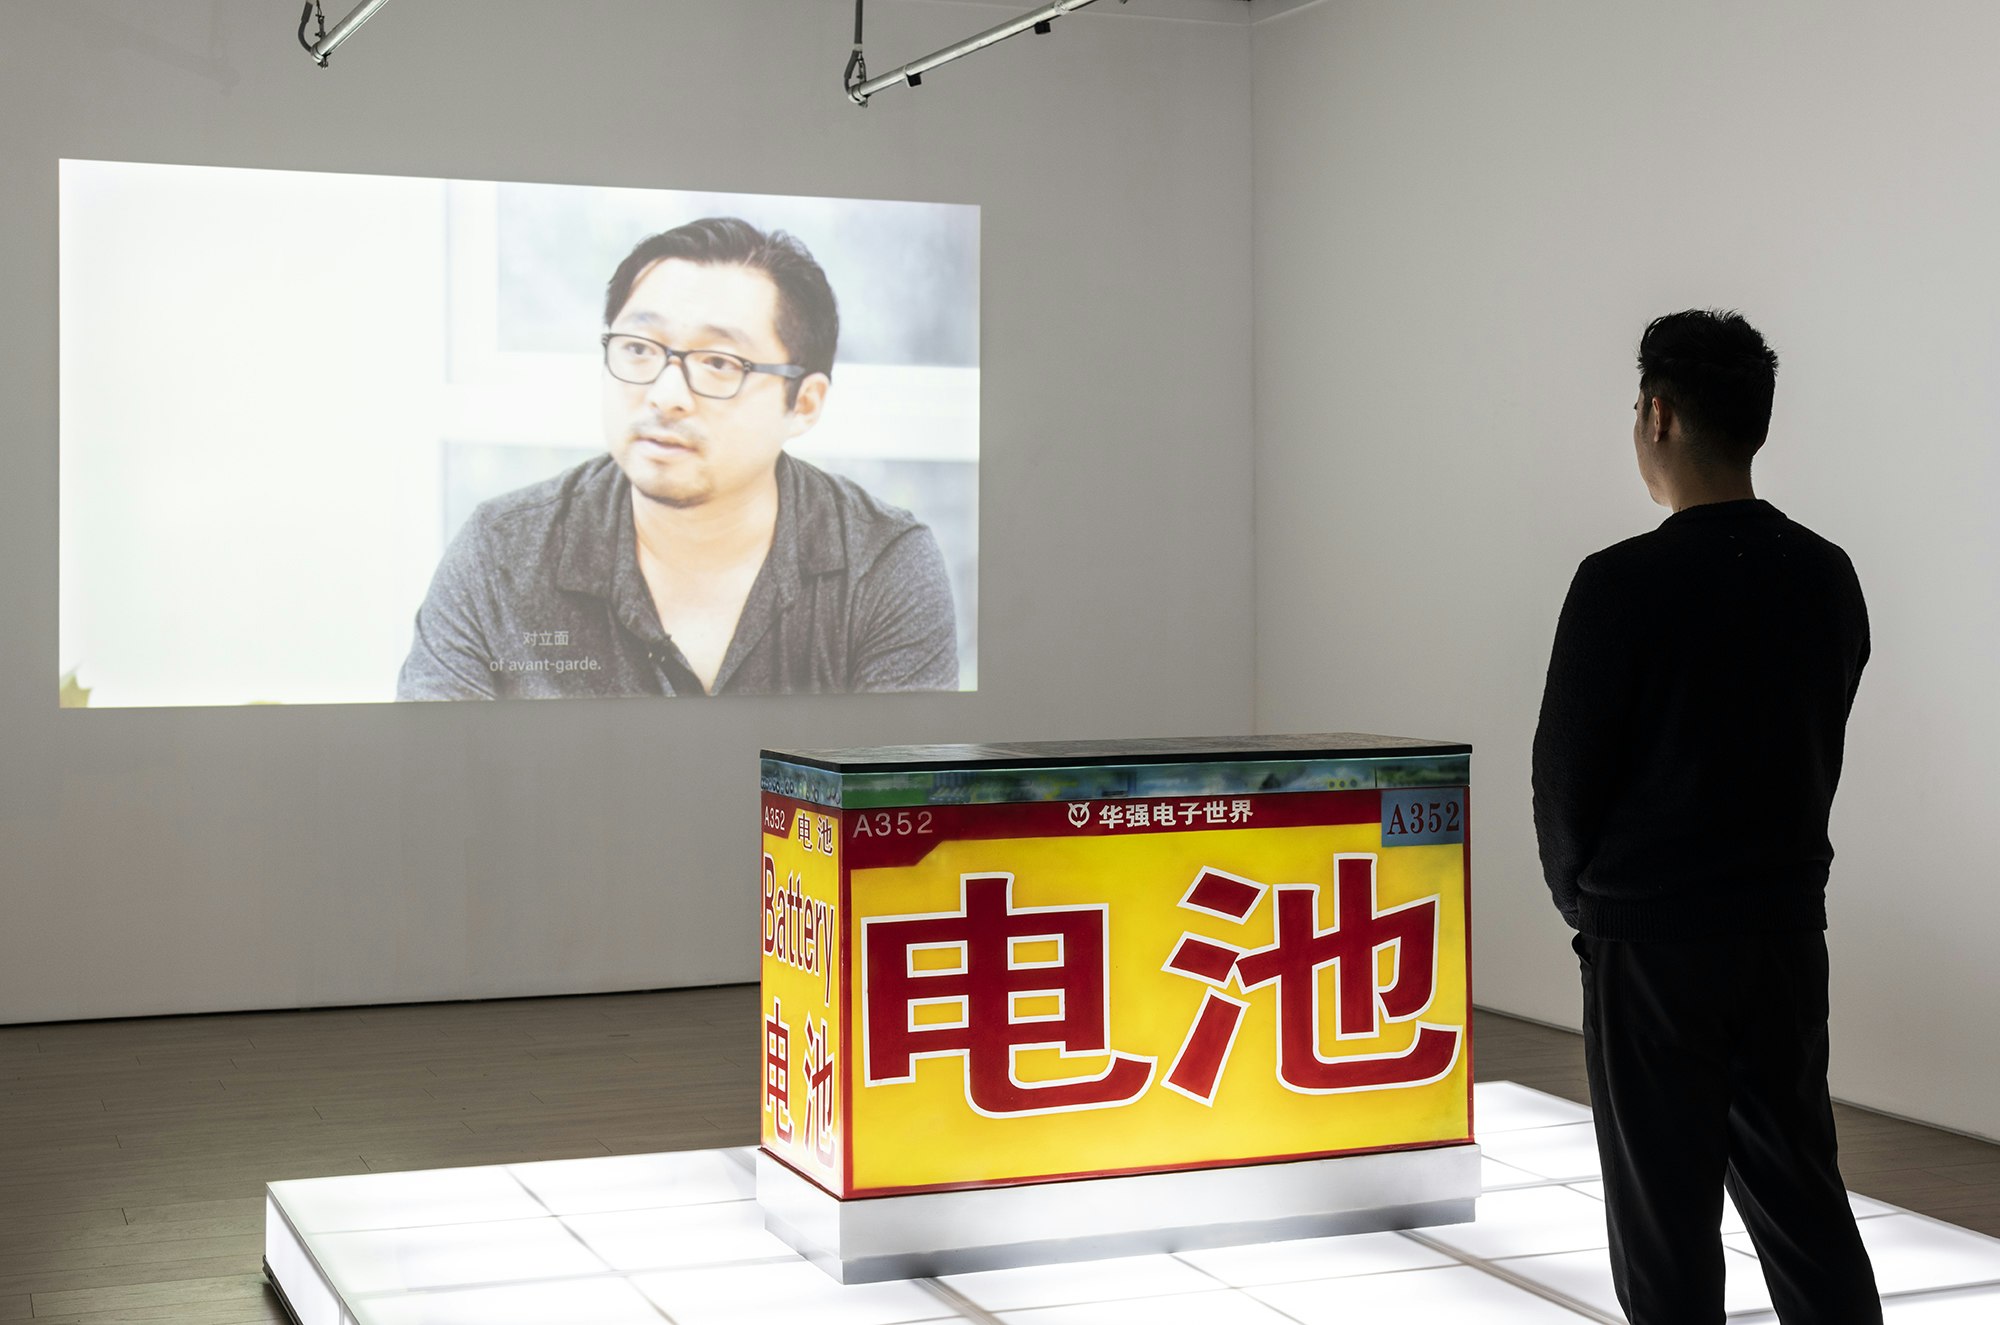 A male-presenting figure dressed in black stands in front of a yellow sculptural block airbrushed with the red Chinese character for 'Battery', situated on an illuminated white plinth. On the wall is a projection of a video still showing an East Asian male-presenting figure wearing glasses.